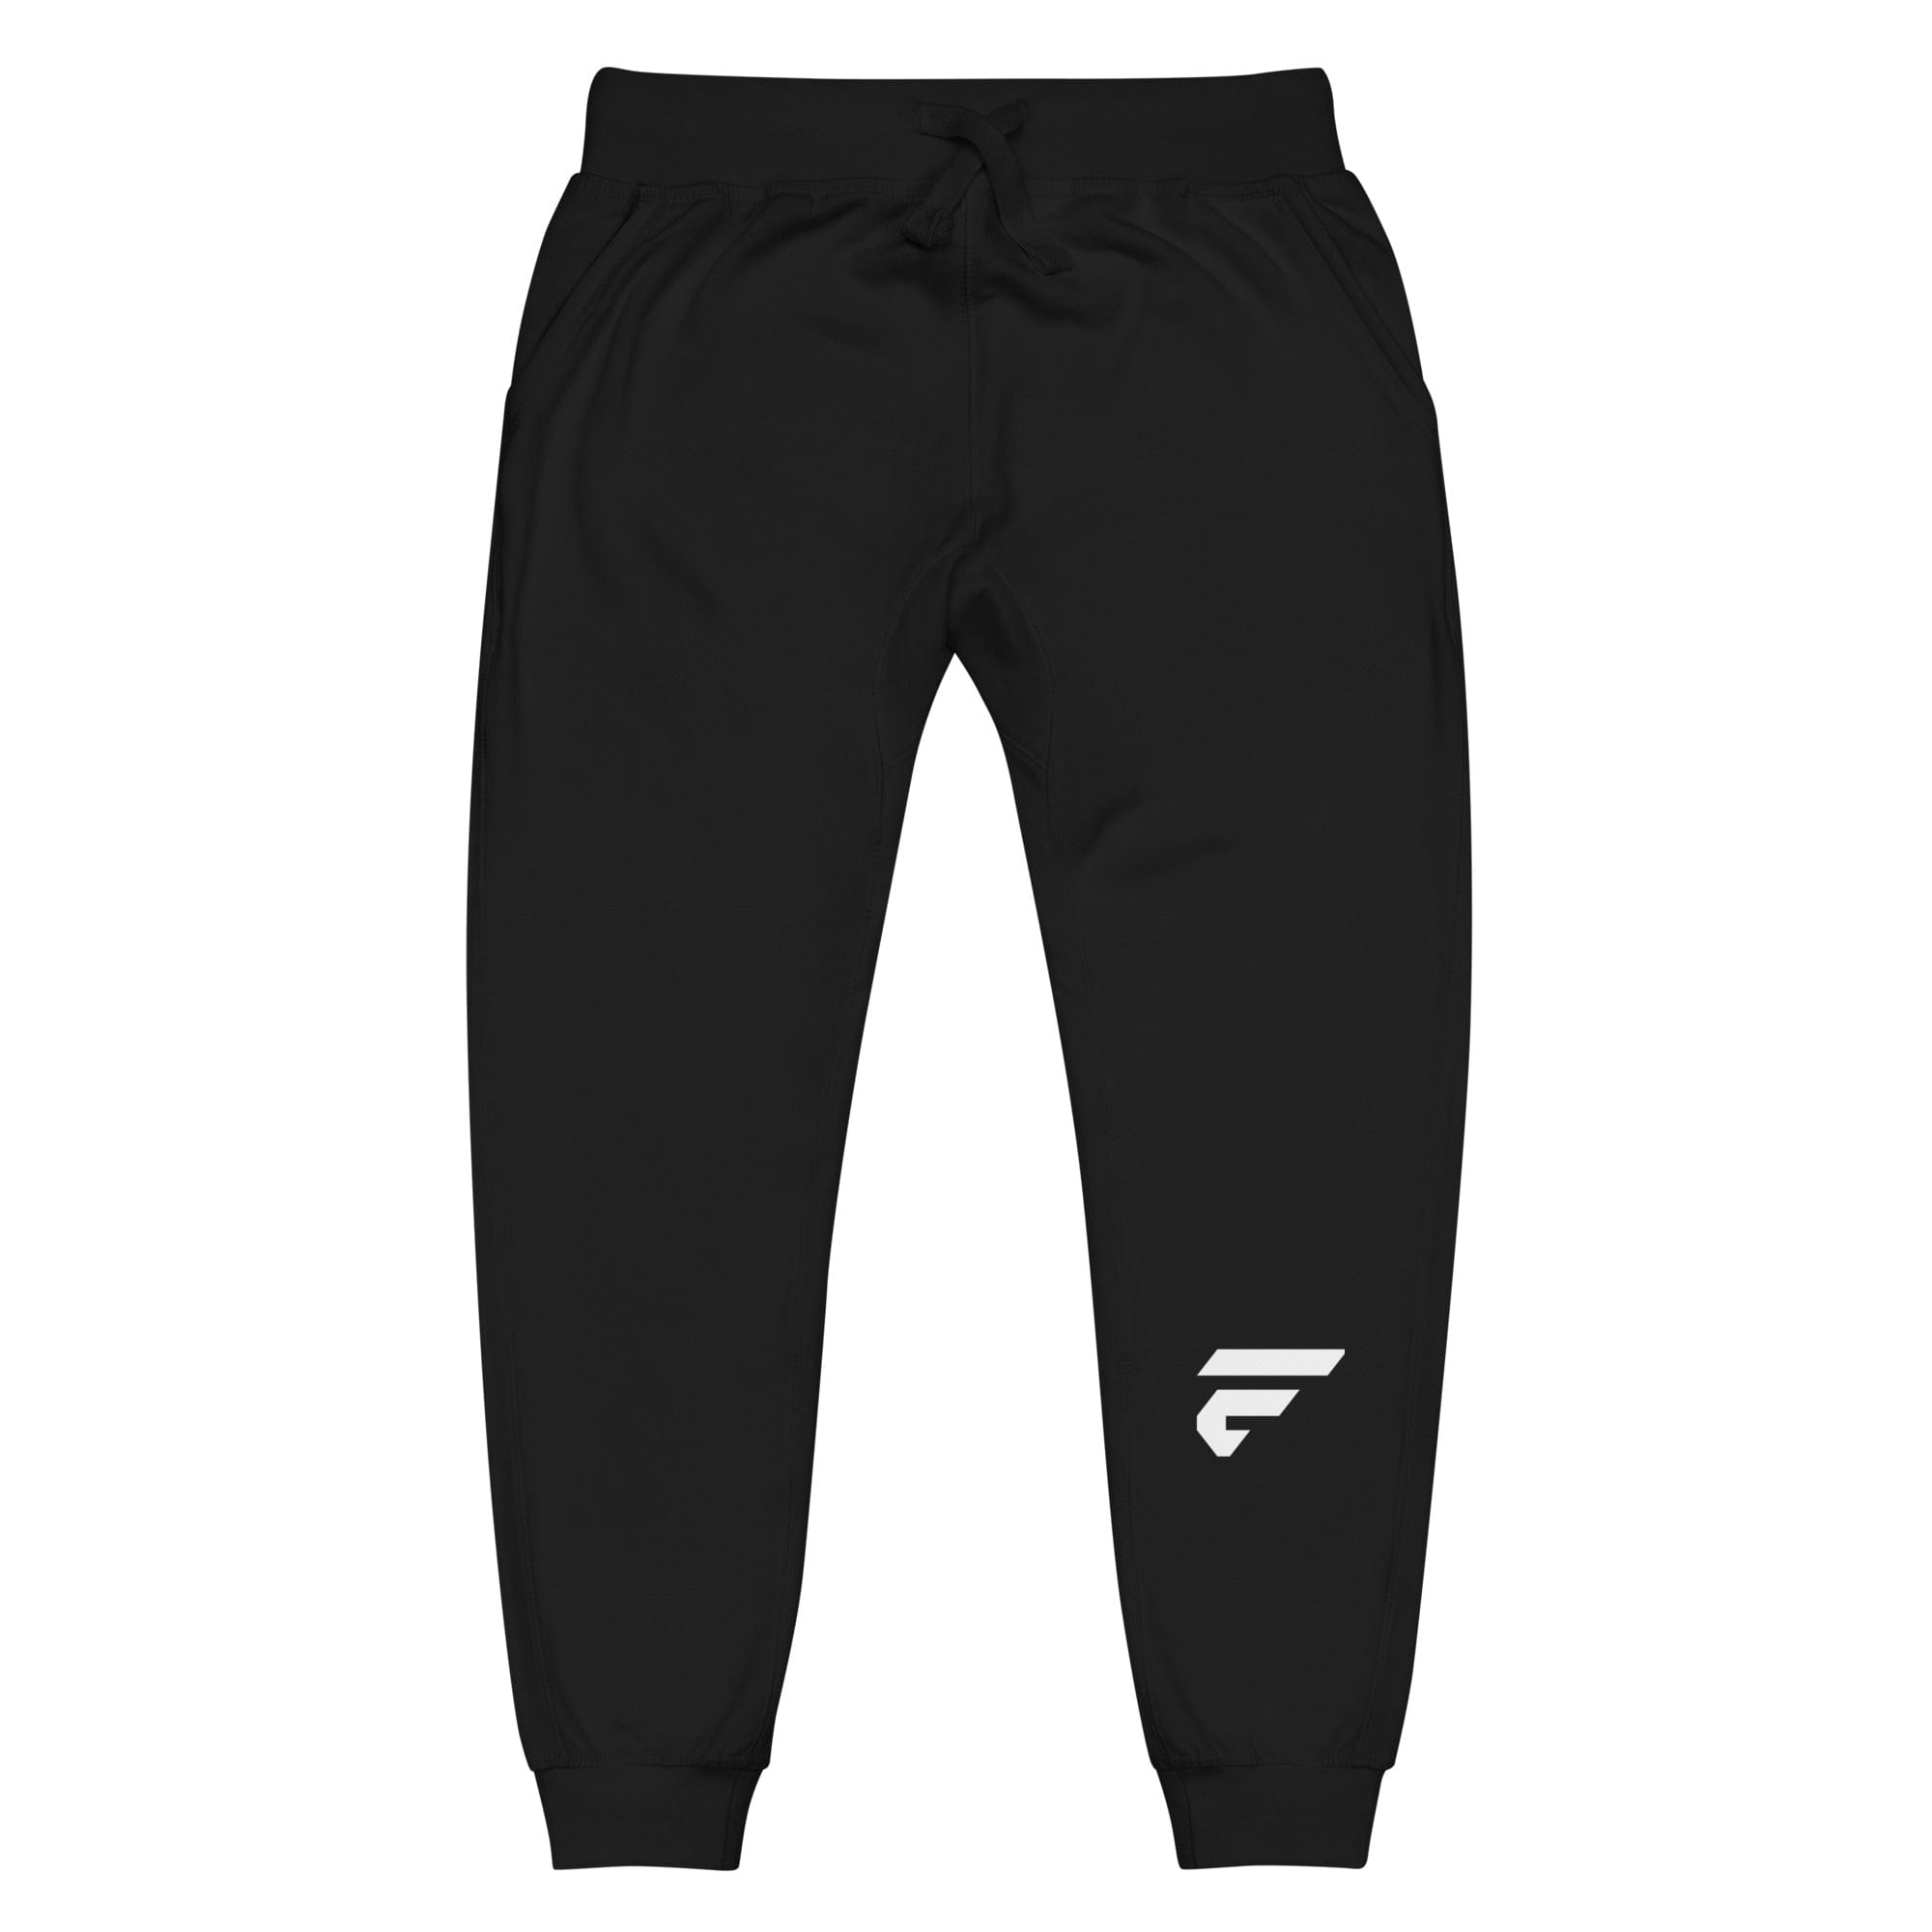 A pair of black joggers with a Fire Cornhole "F" logo embroidered on the left leg